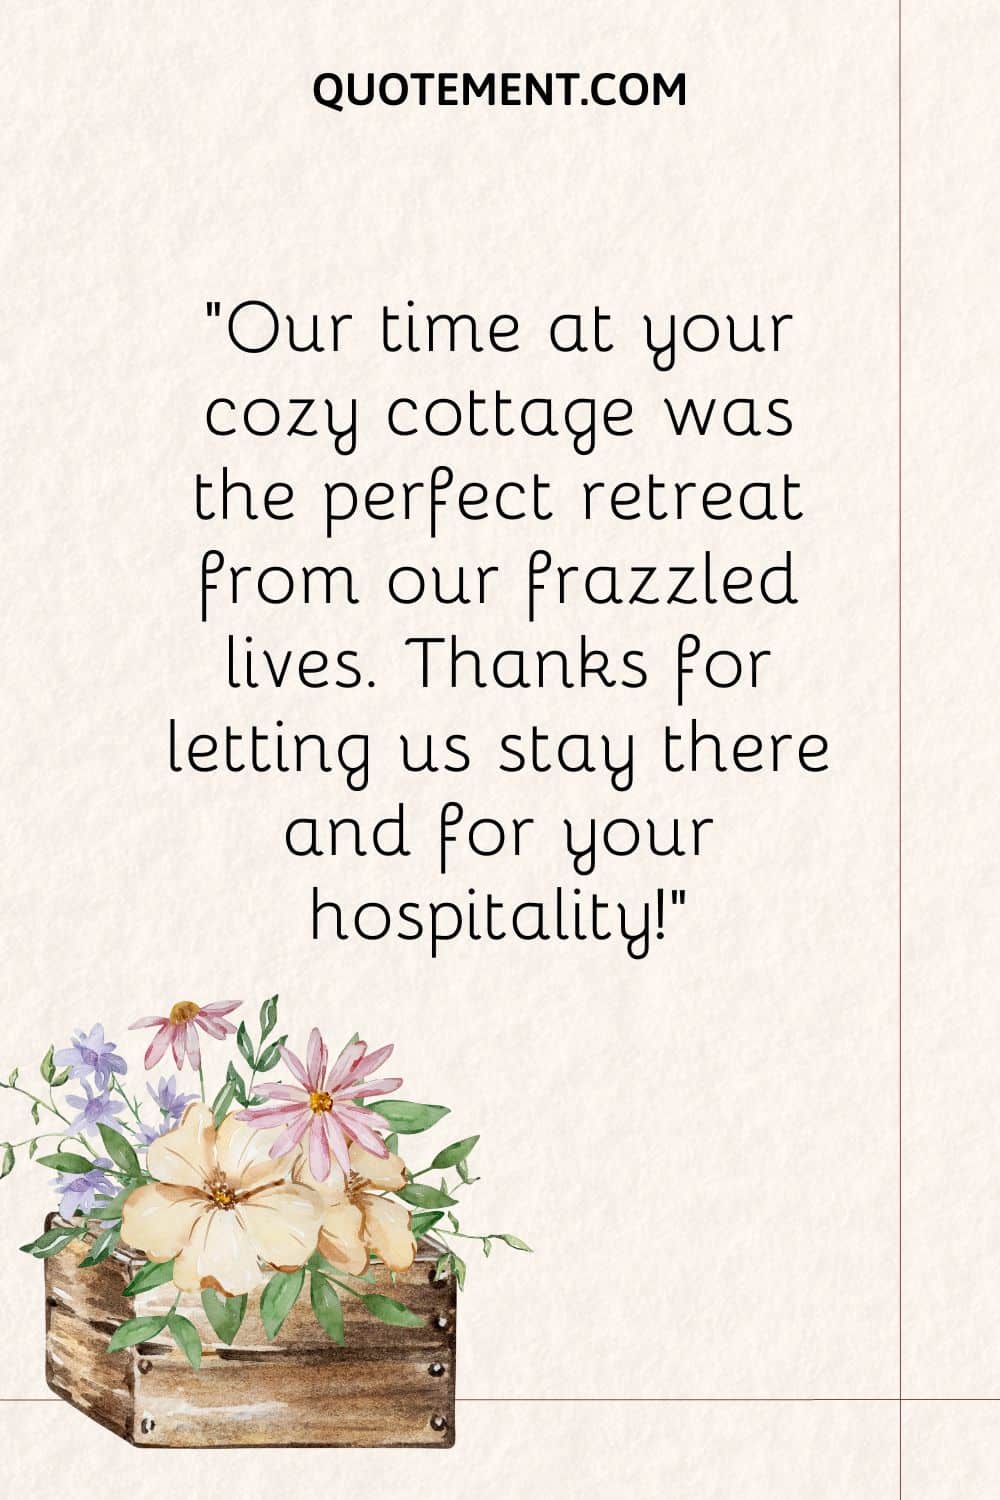 Our time at your cozy cottage was the perfect retreat from our frazzled lives.